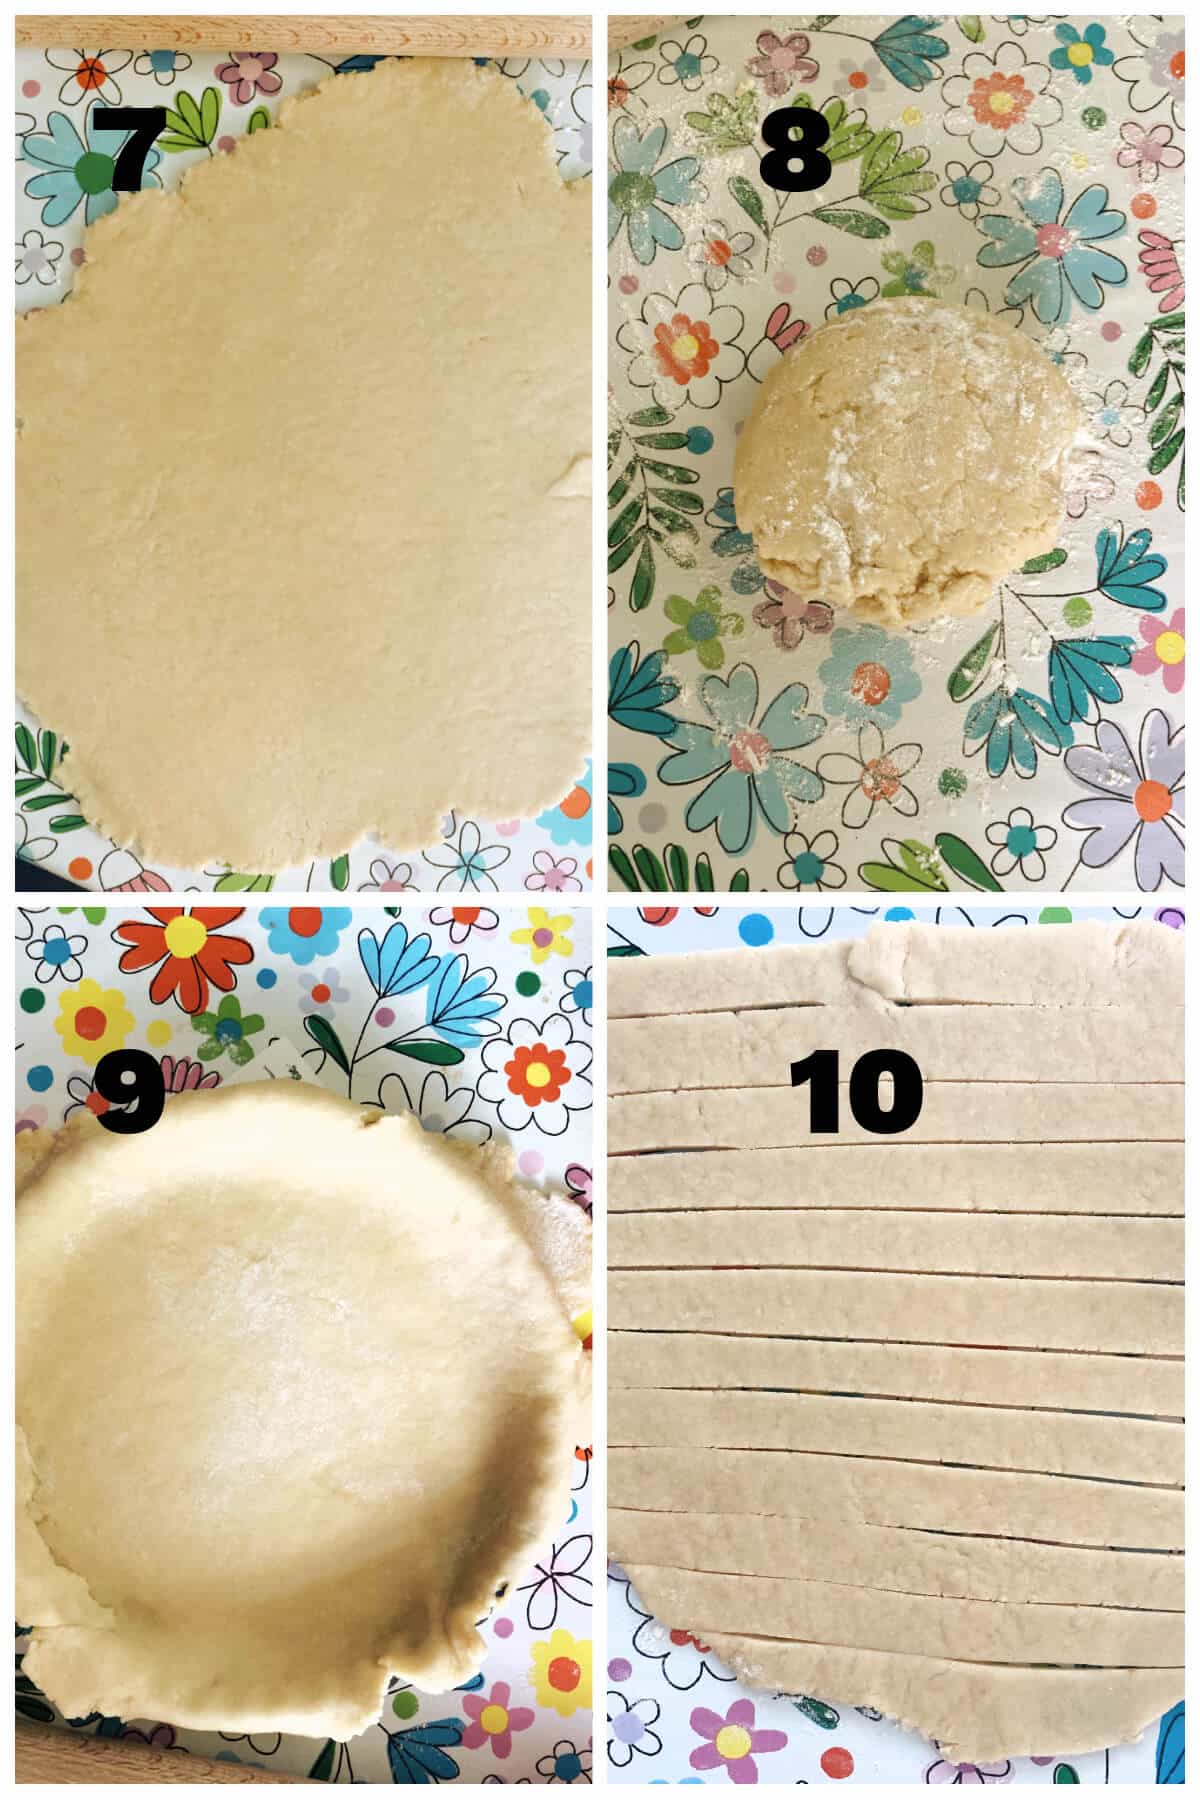 Collage of 4 photos to show how to prepare the dough for apple pie.